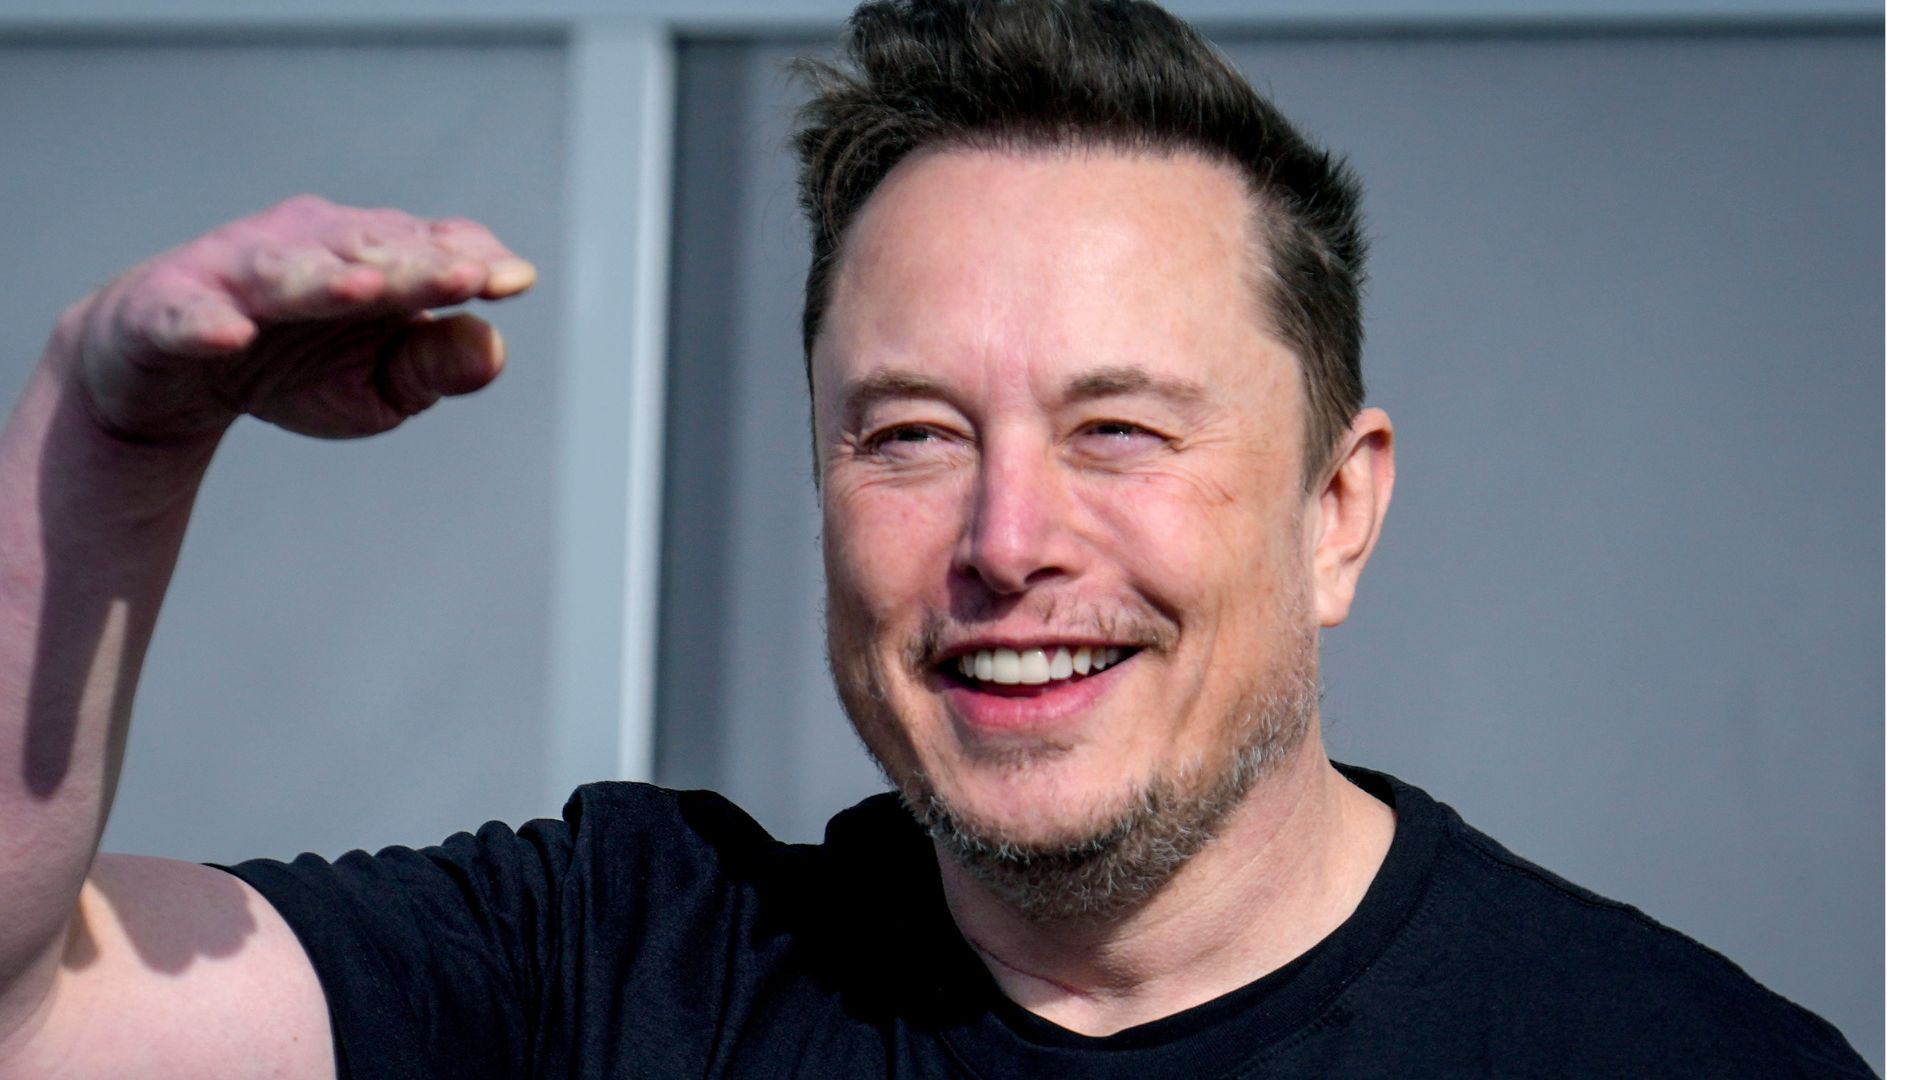 Tech entrepreneur Elon Musk has dismissed claims that he invented Bitcoin /AP/Ebrahim Noroozi